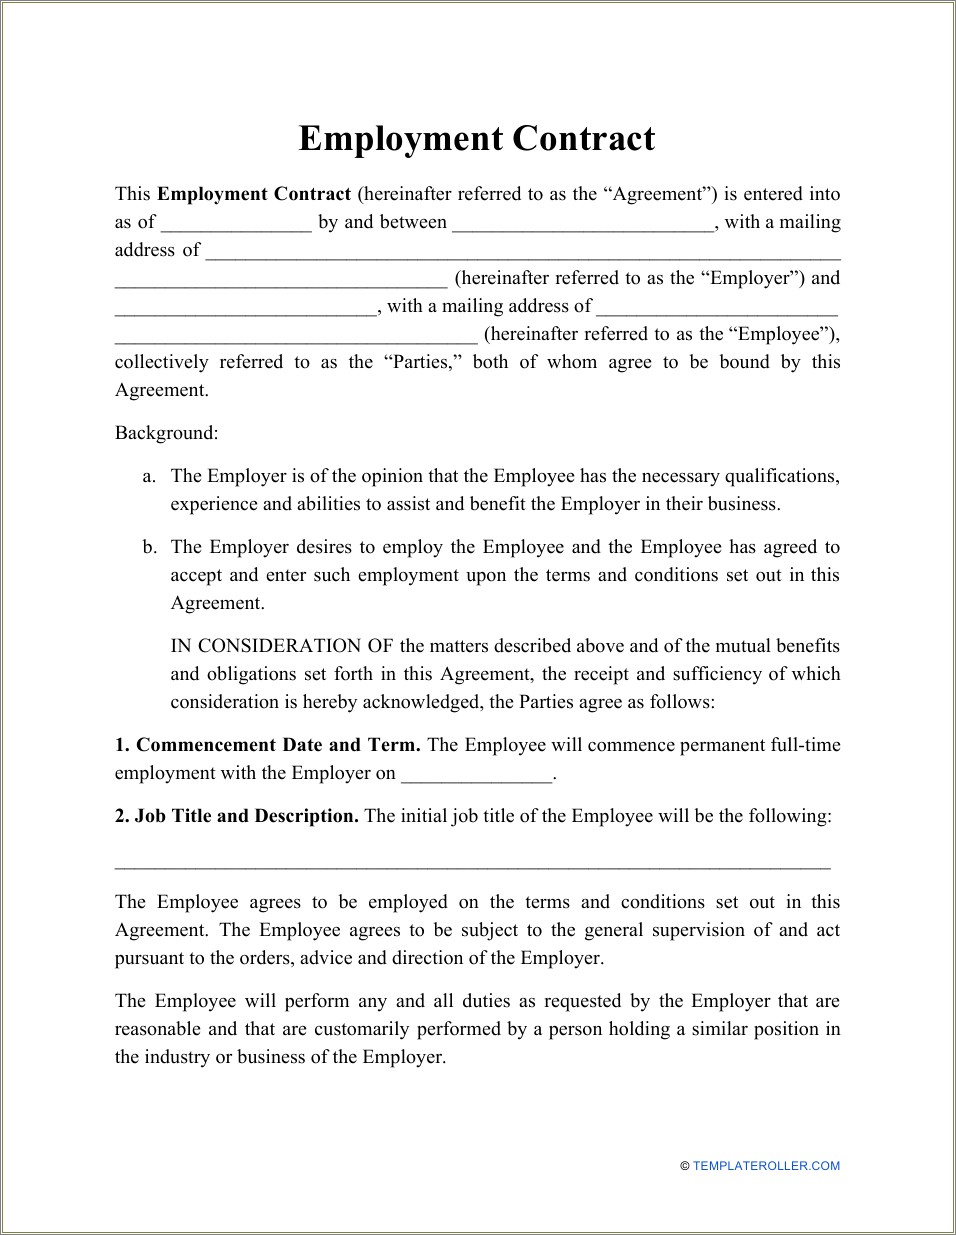 Contract Of Employment Part Time Template Free